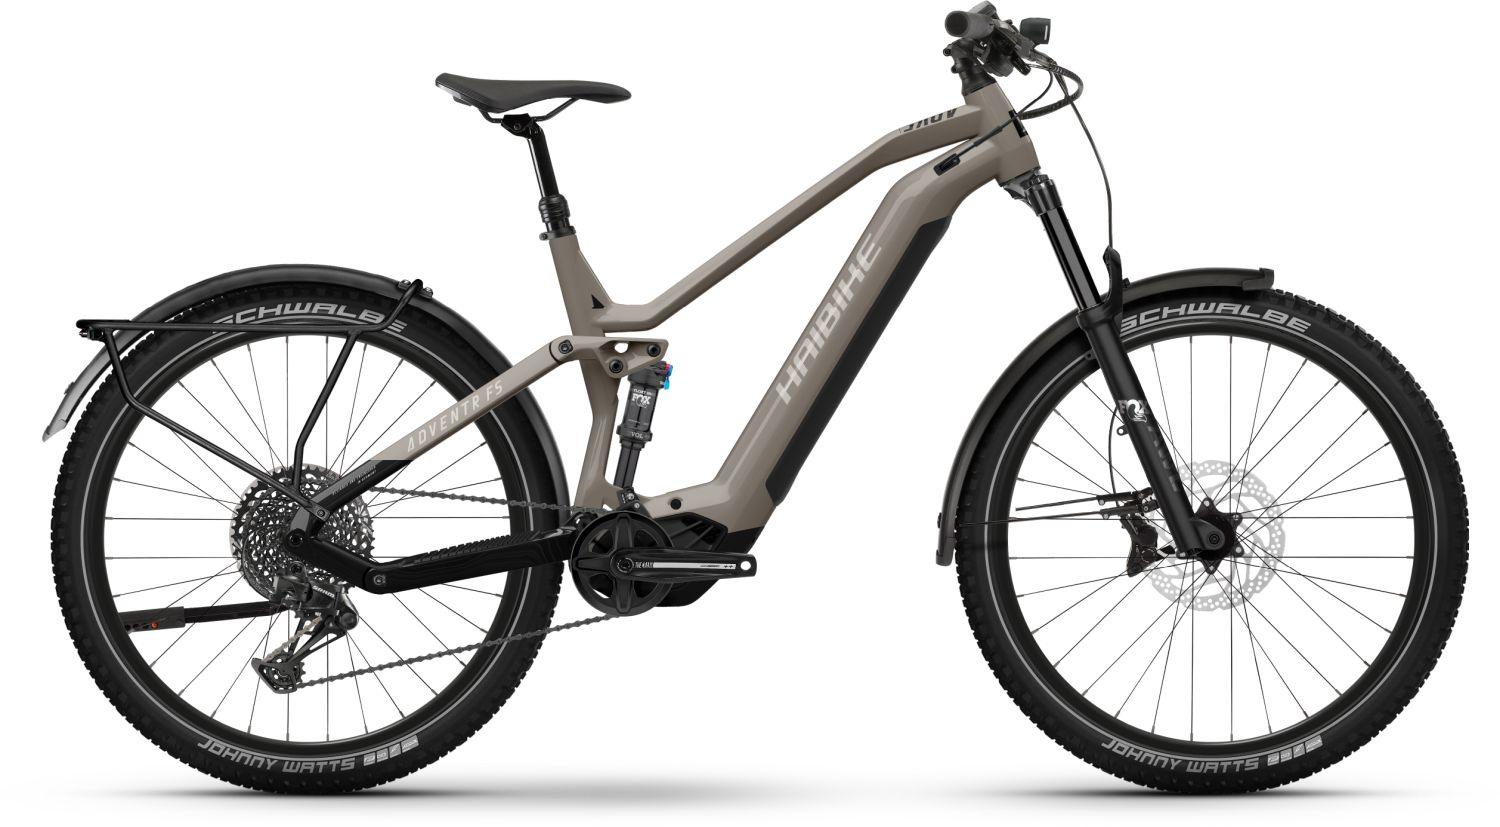 PRICE CITY SALE ▻ E-mountain bikes with a -28% discount